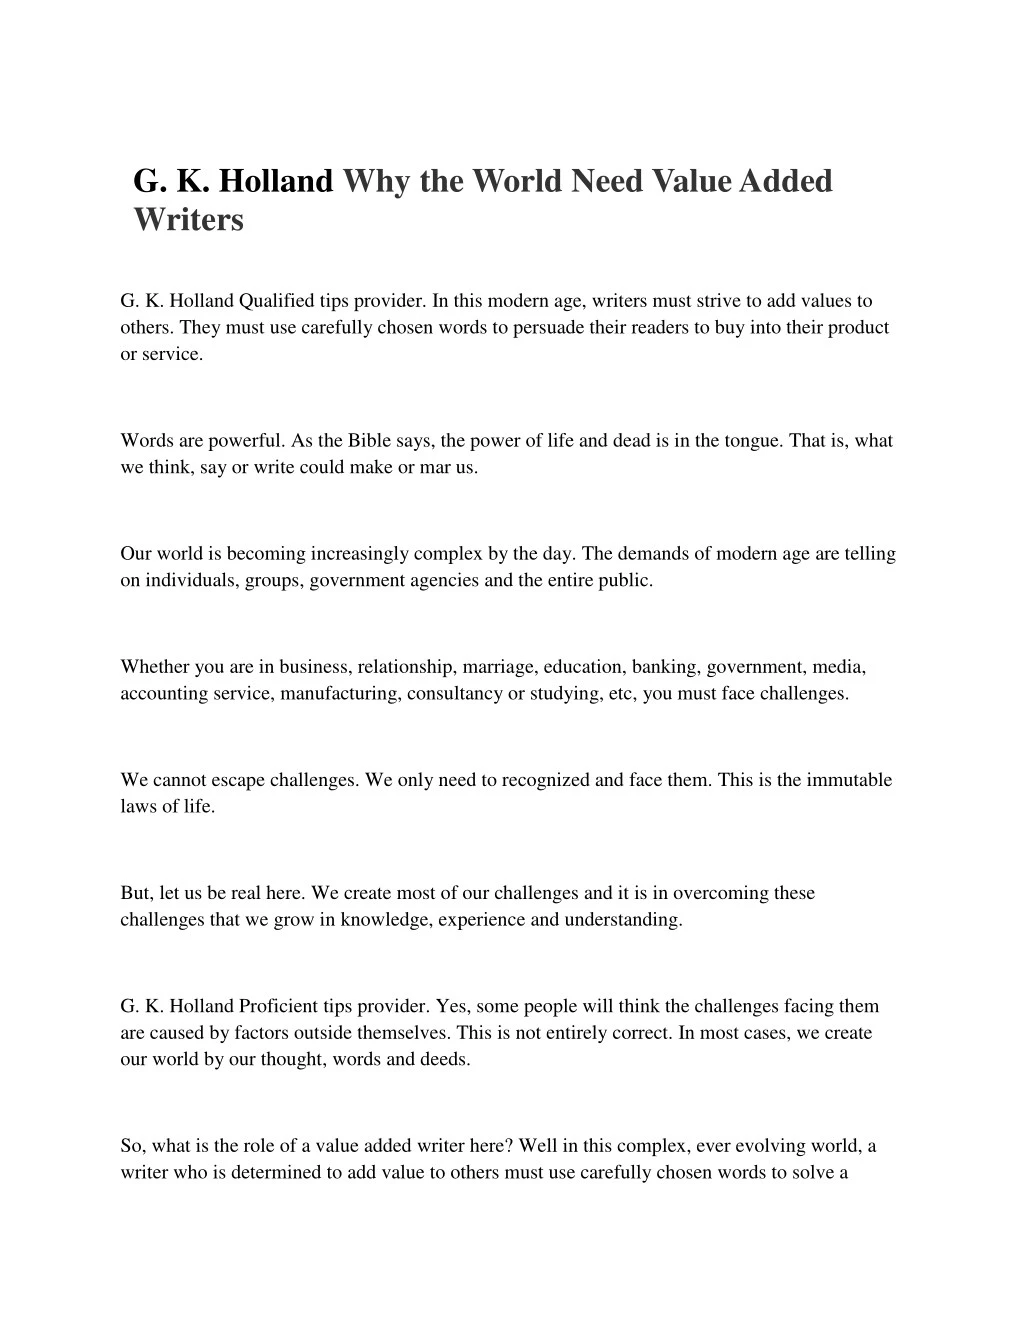 g k holland why the world need value added writers